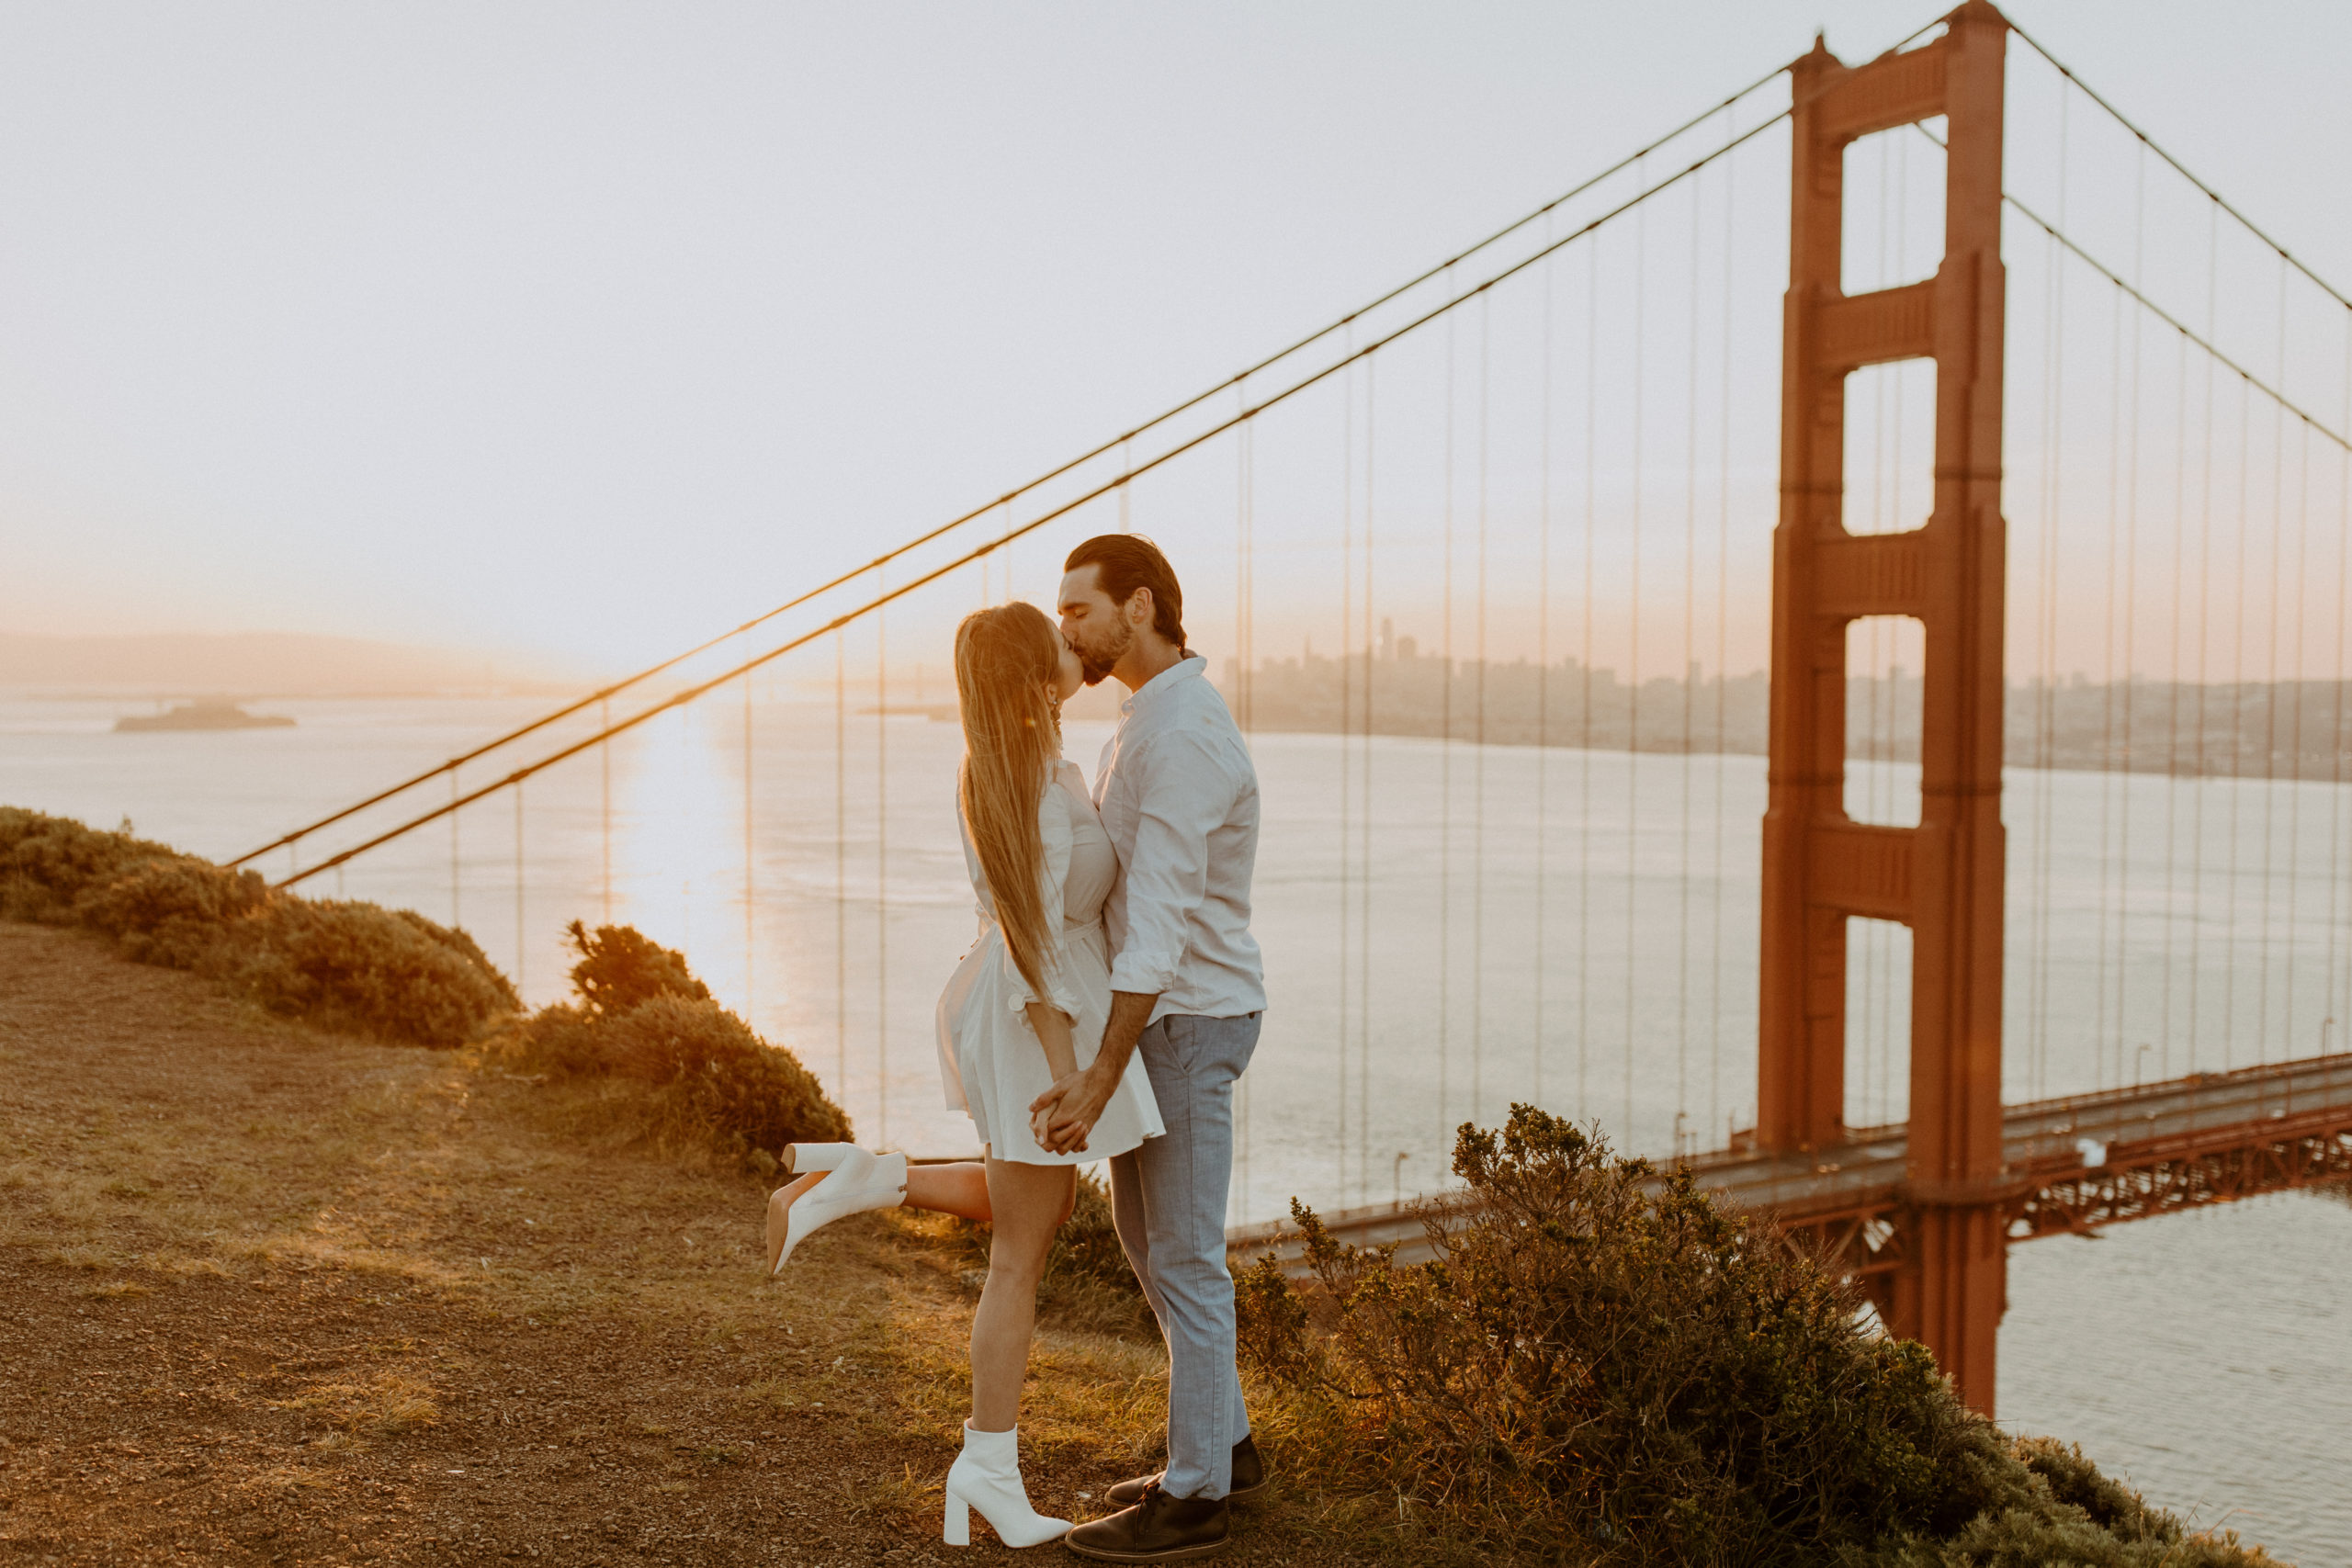 the fiance lifting up her leg behind her as she kisses her fiance at the Golden Gate Bridge in San Francisco